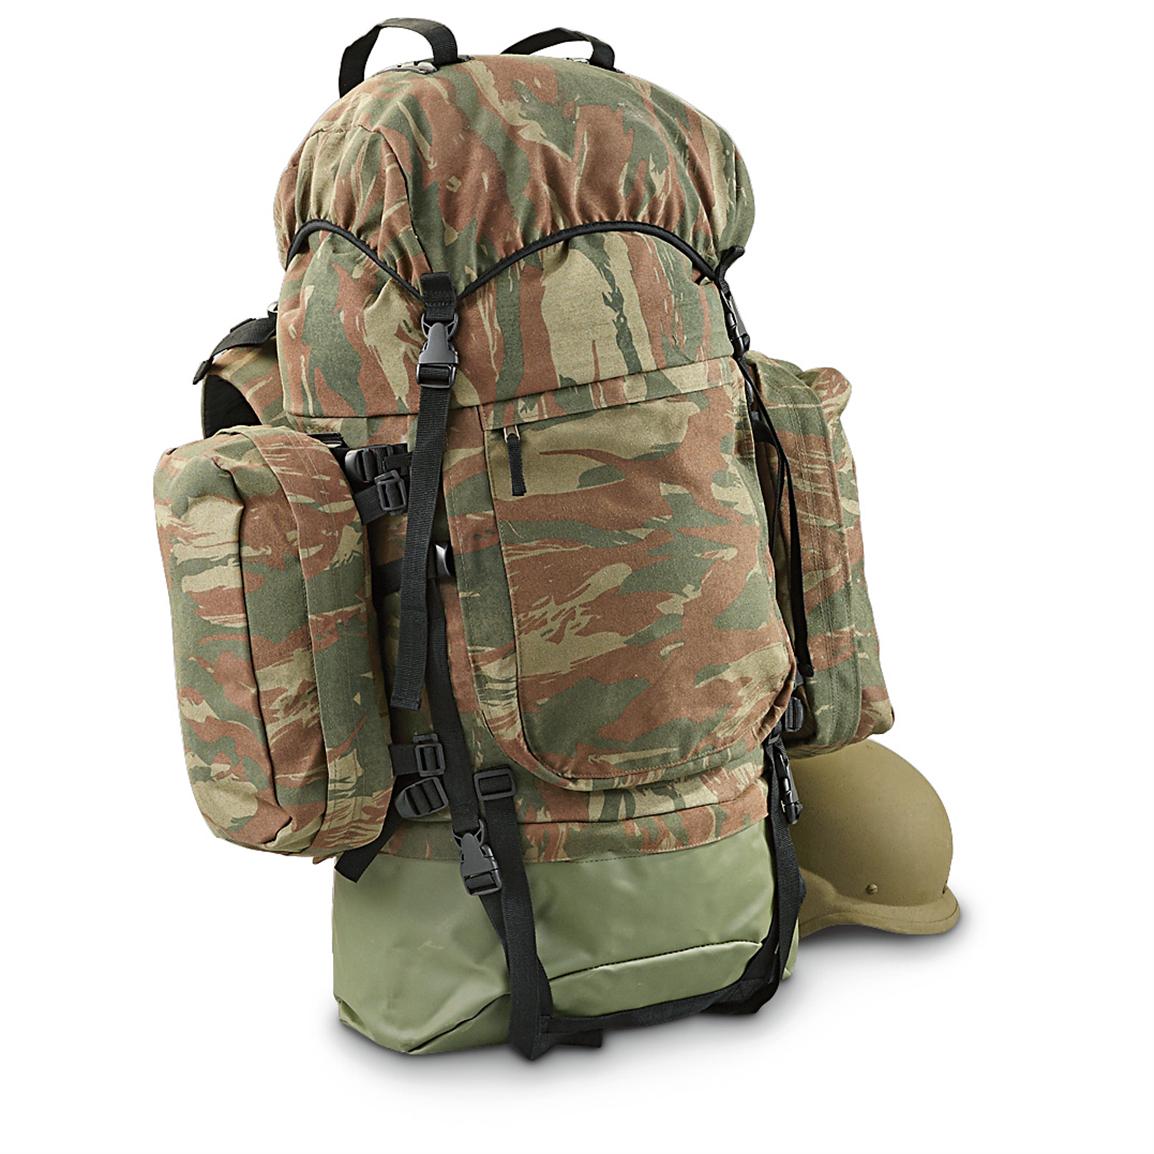 Walmart rolling backpack luggage, large military sling bag, 5 piece ...